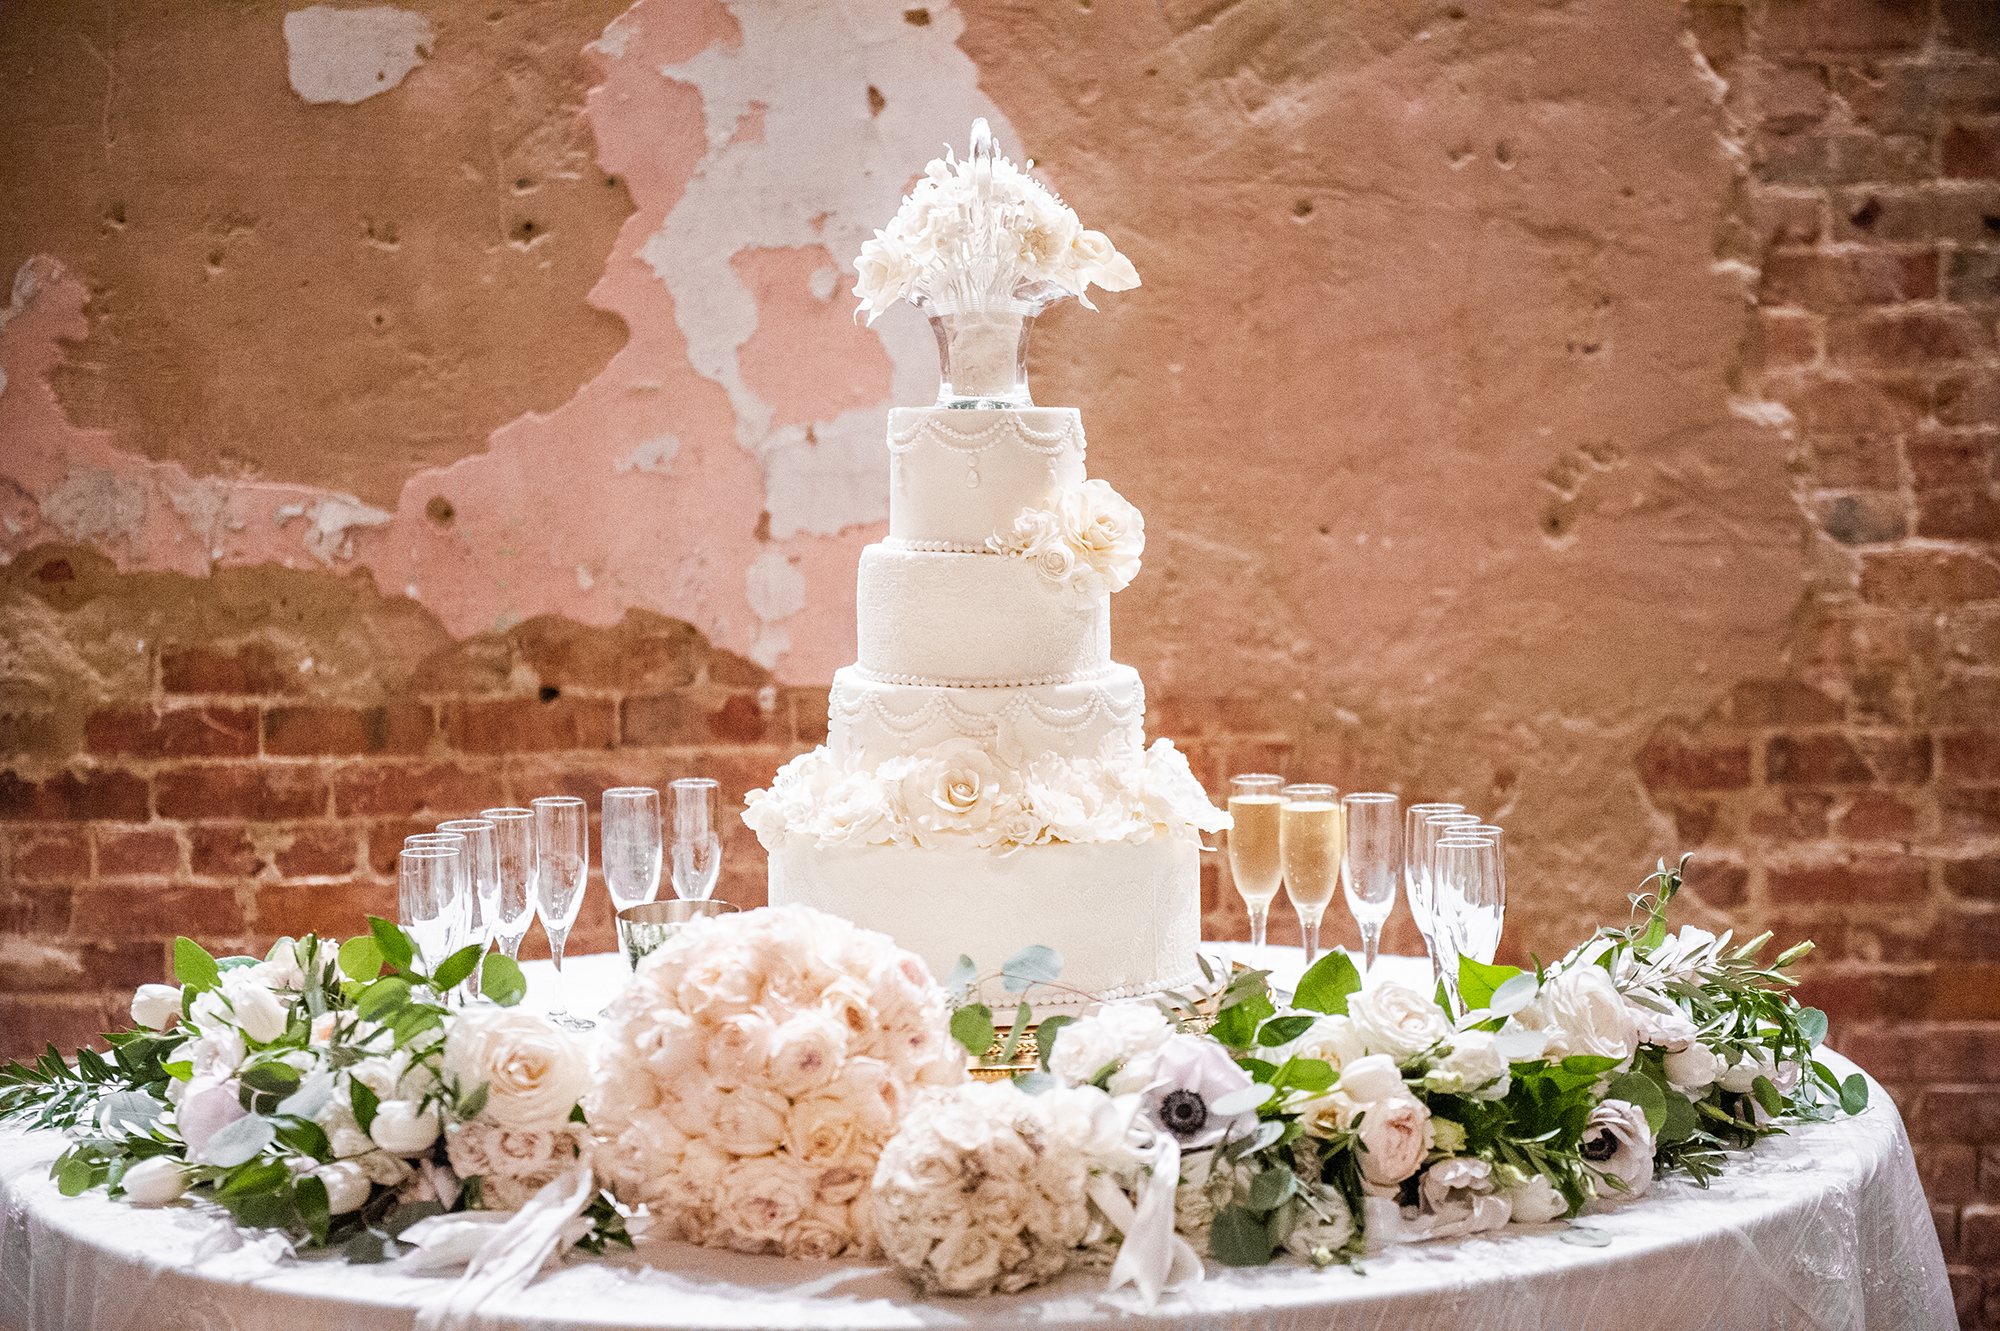 Wedding cake with flowers and champagne